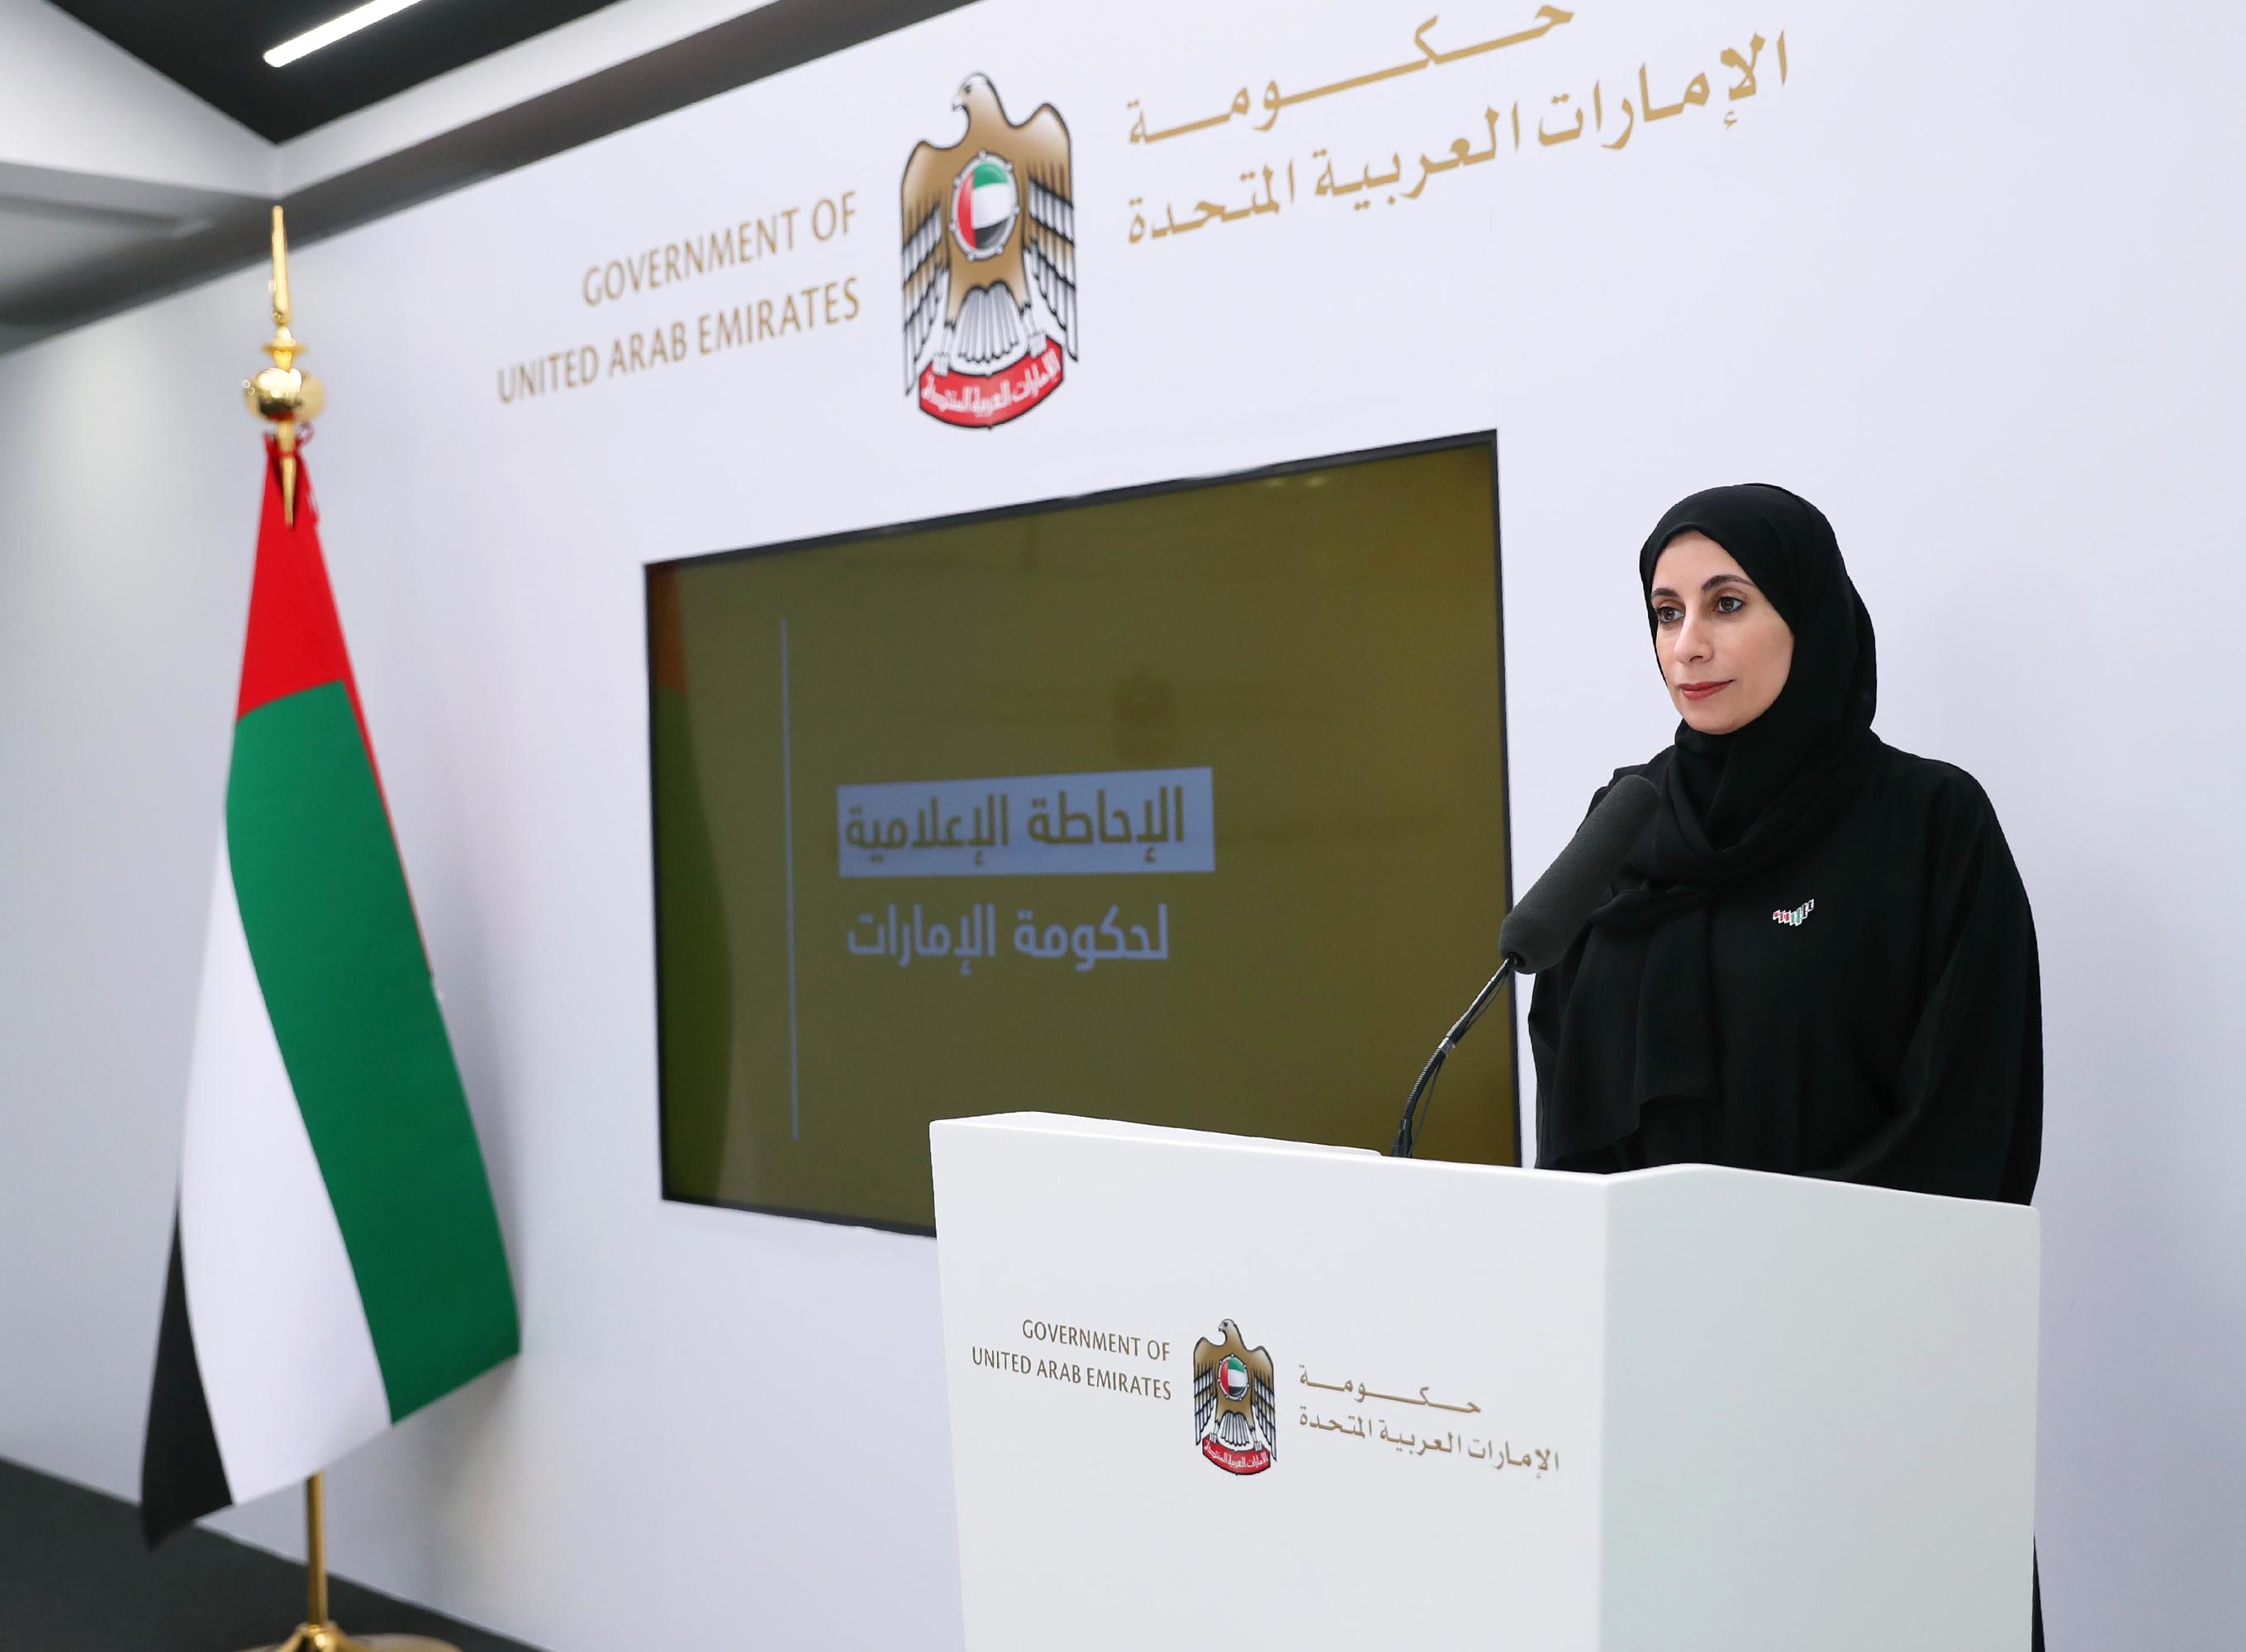 UAE announces 680 new Covid-19 cases, as officials warn about gatherings